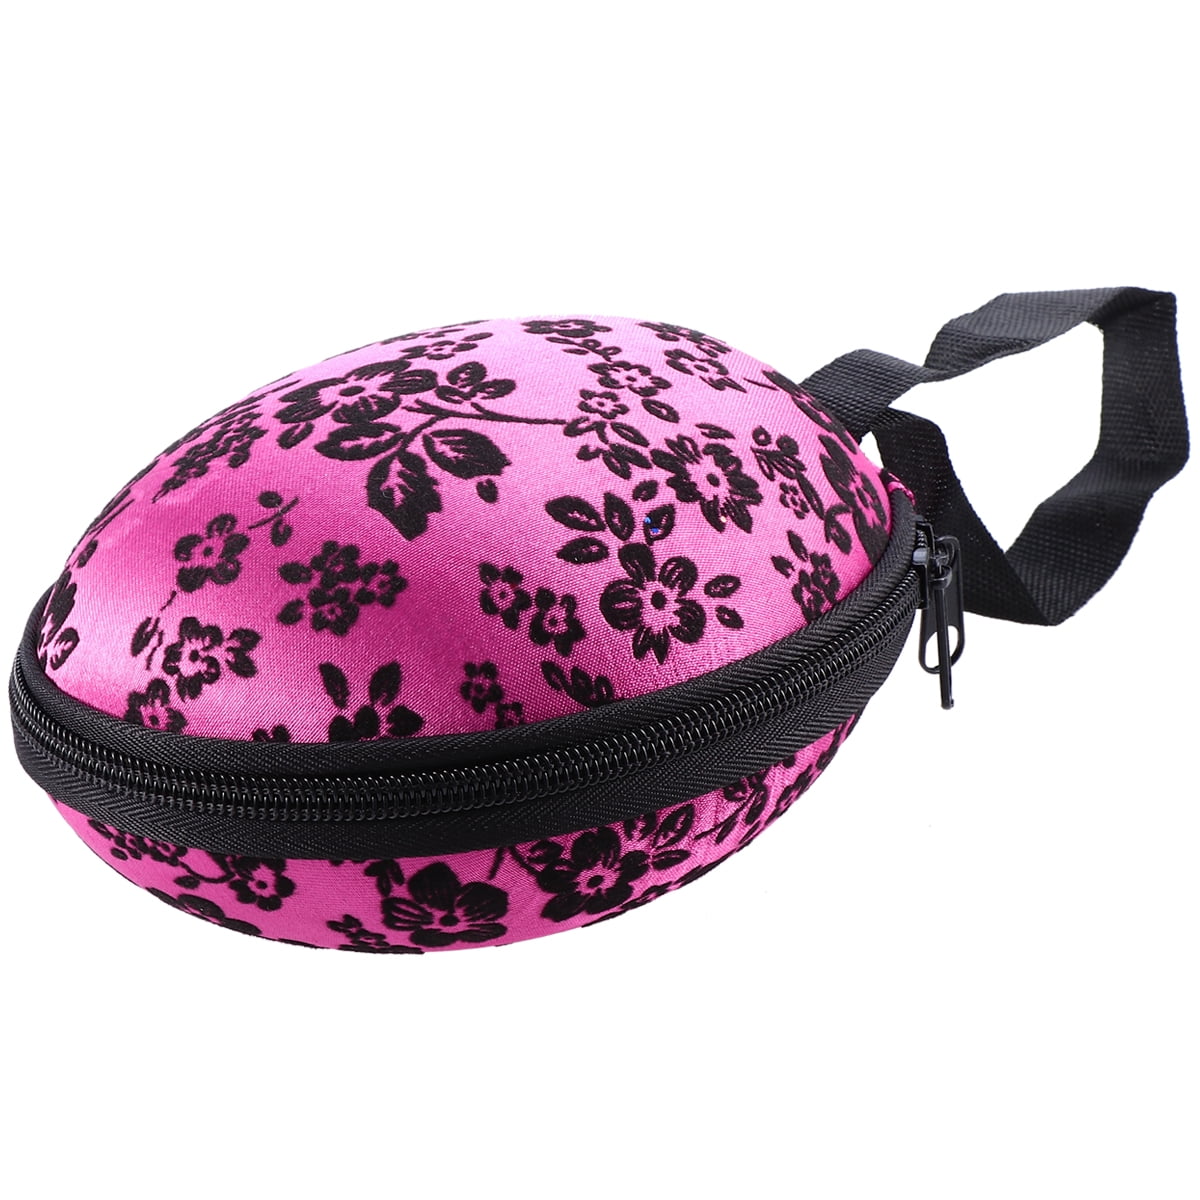 Tinksky Silicone Bra Case Invisible Bra Storage Case Zippered Travel Case  for Women(Random Style) 